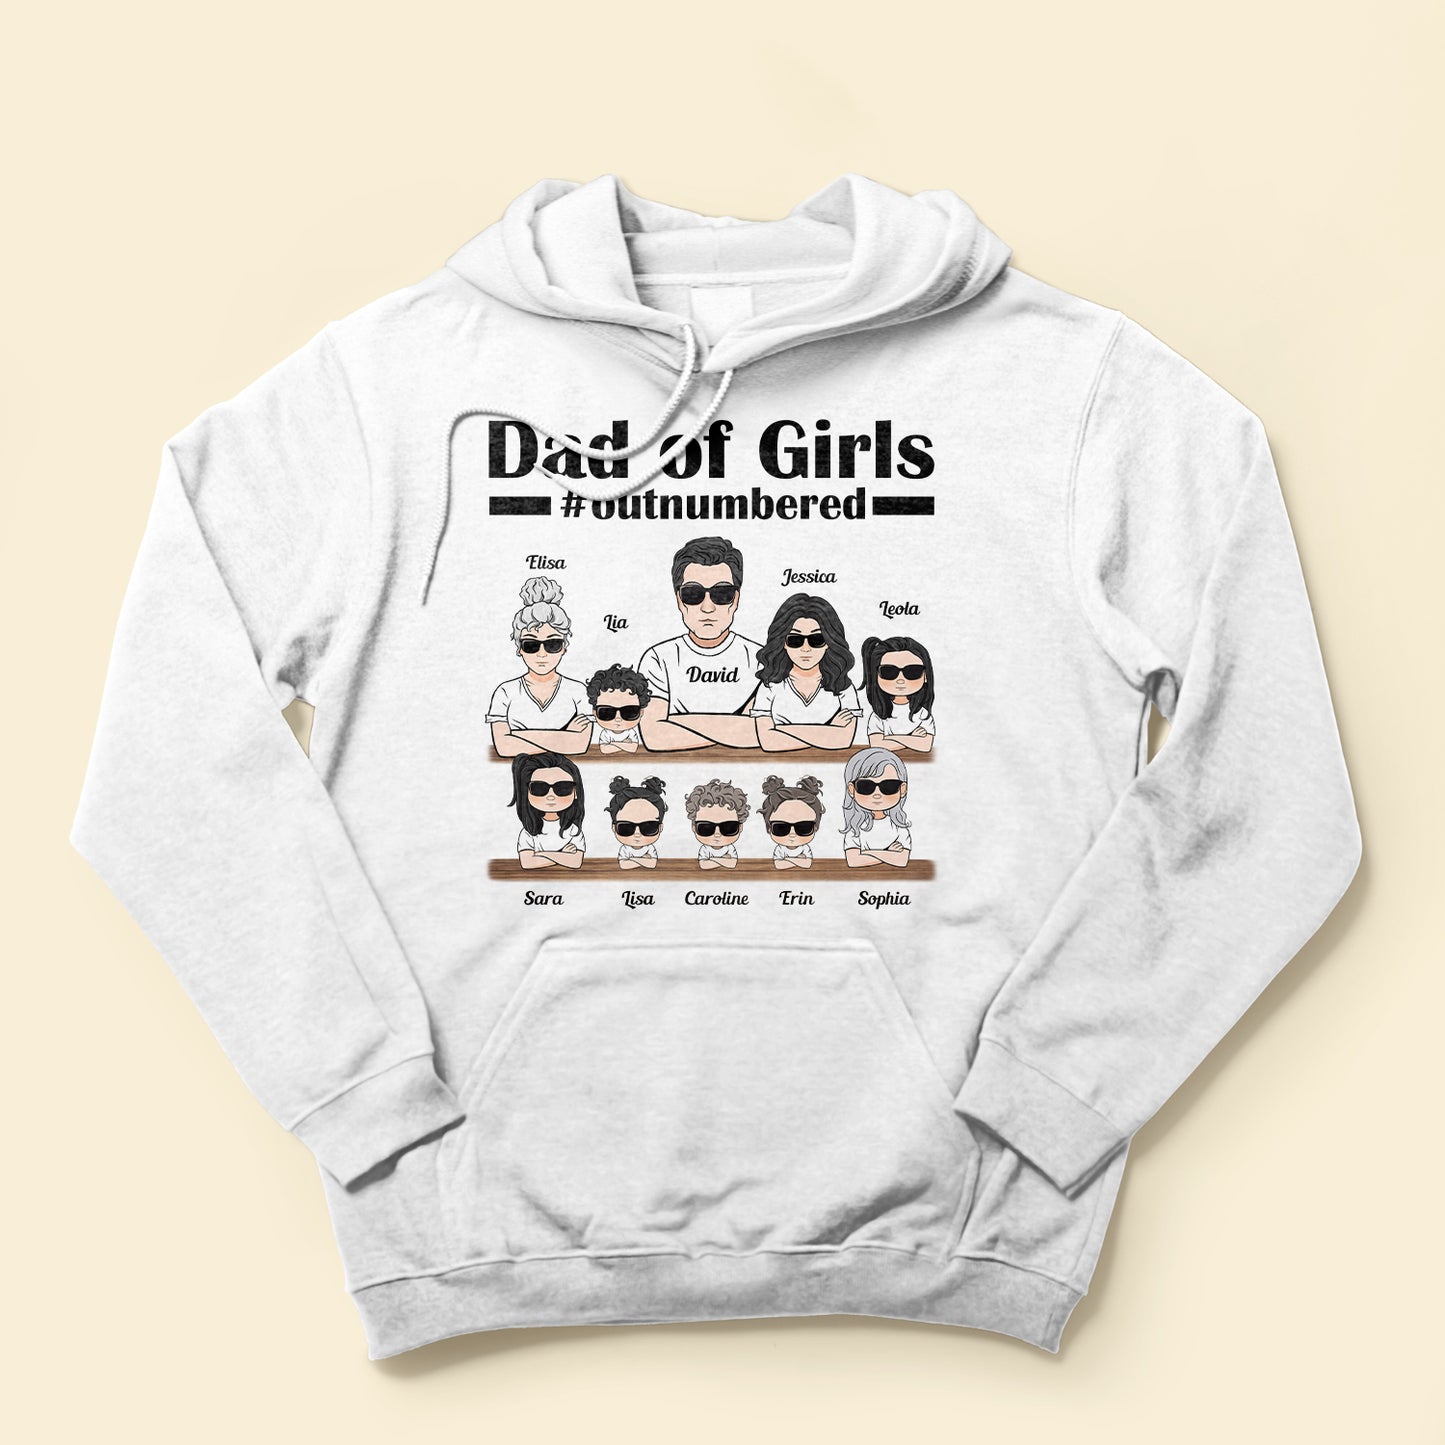 Dad Of Girls - Personalized Shirt - Birthday Father's Day Gift For Dad, Daddy, Fathers - Gift From Wife - Daughters